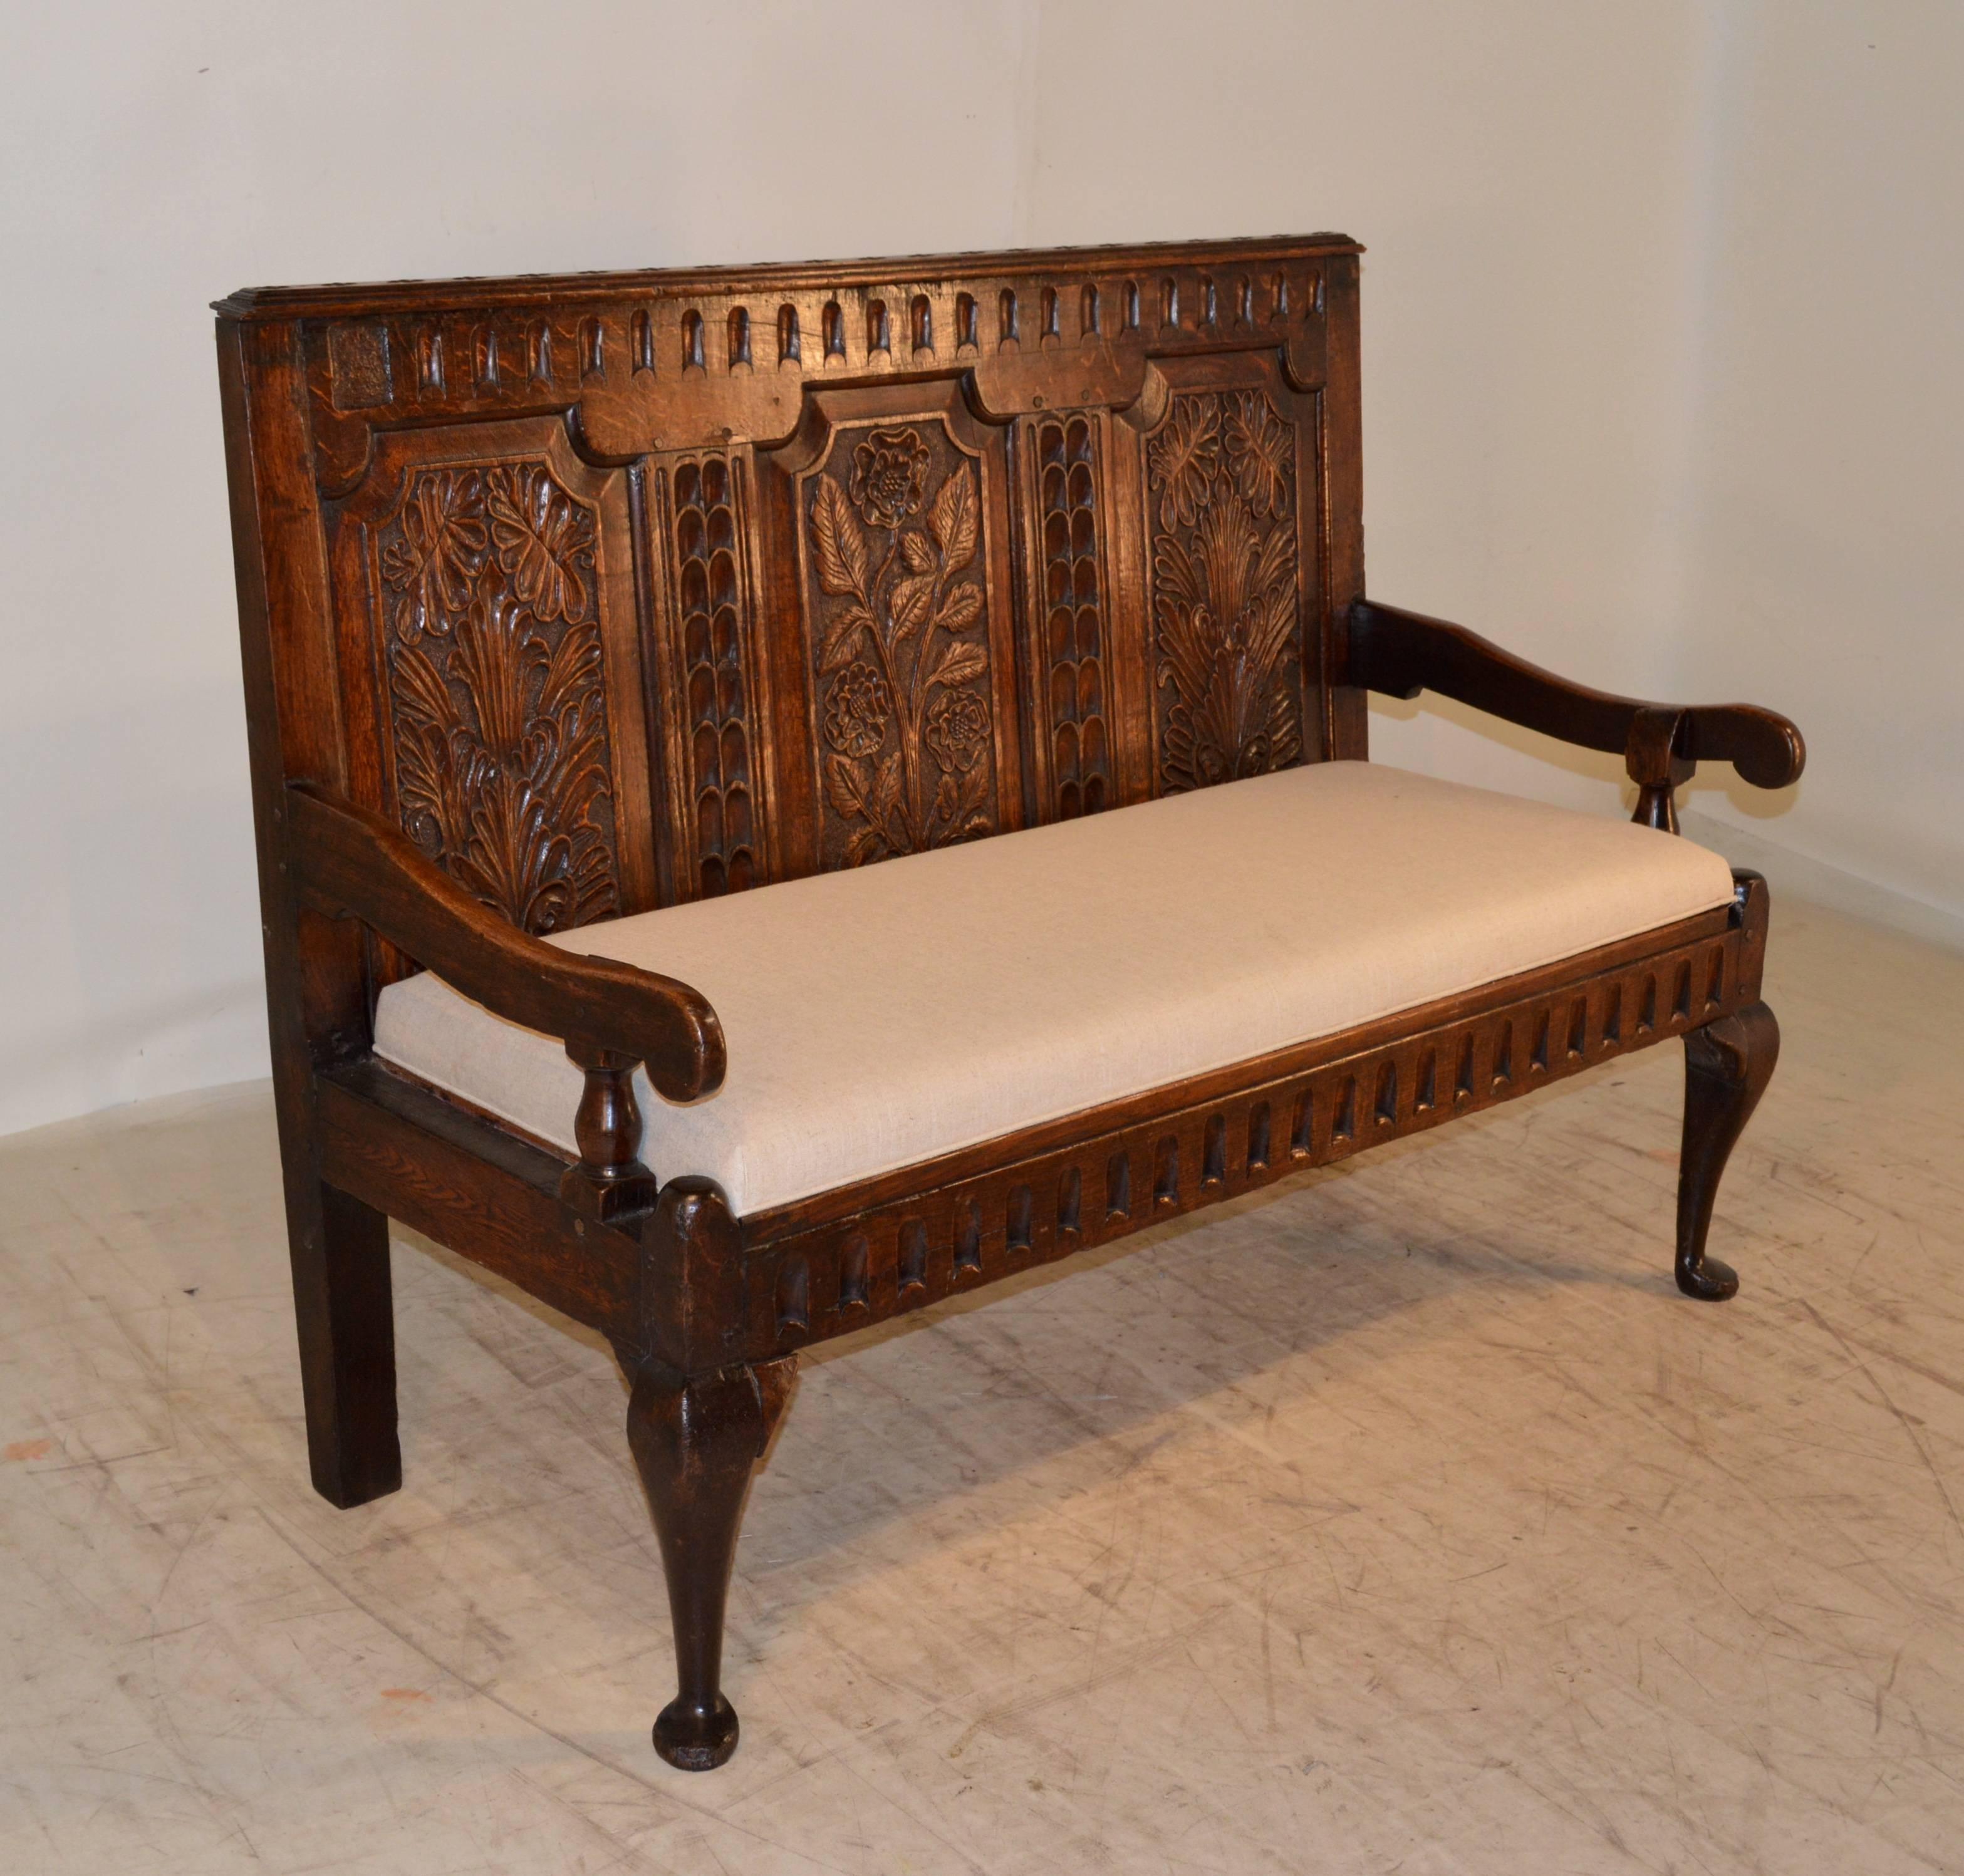 Early 18th century English oak carved settle with a raised and carved decorated paneled back.  The seat is made up of original oak slats, and we recently had it upholstered with cushioning in linen for comfort.  The apron is carved as well and is